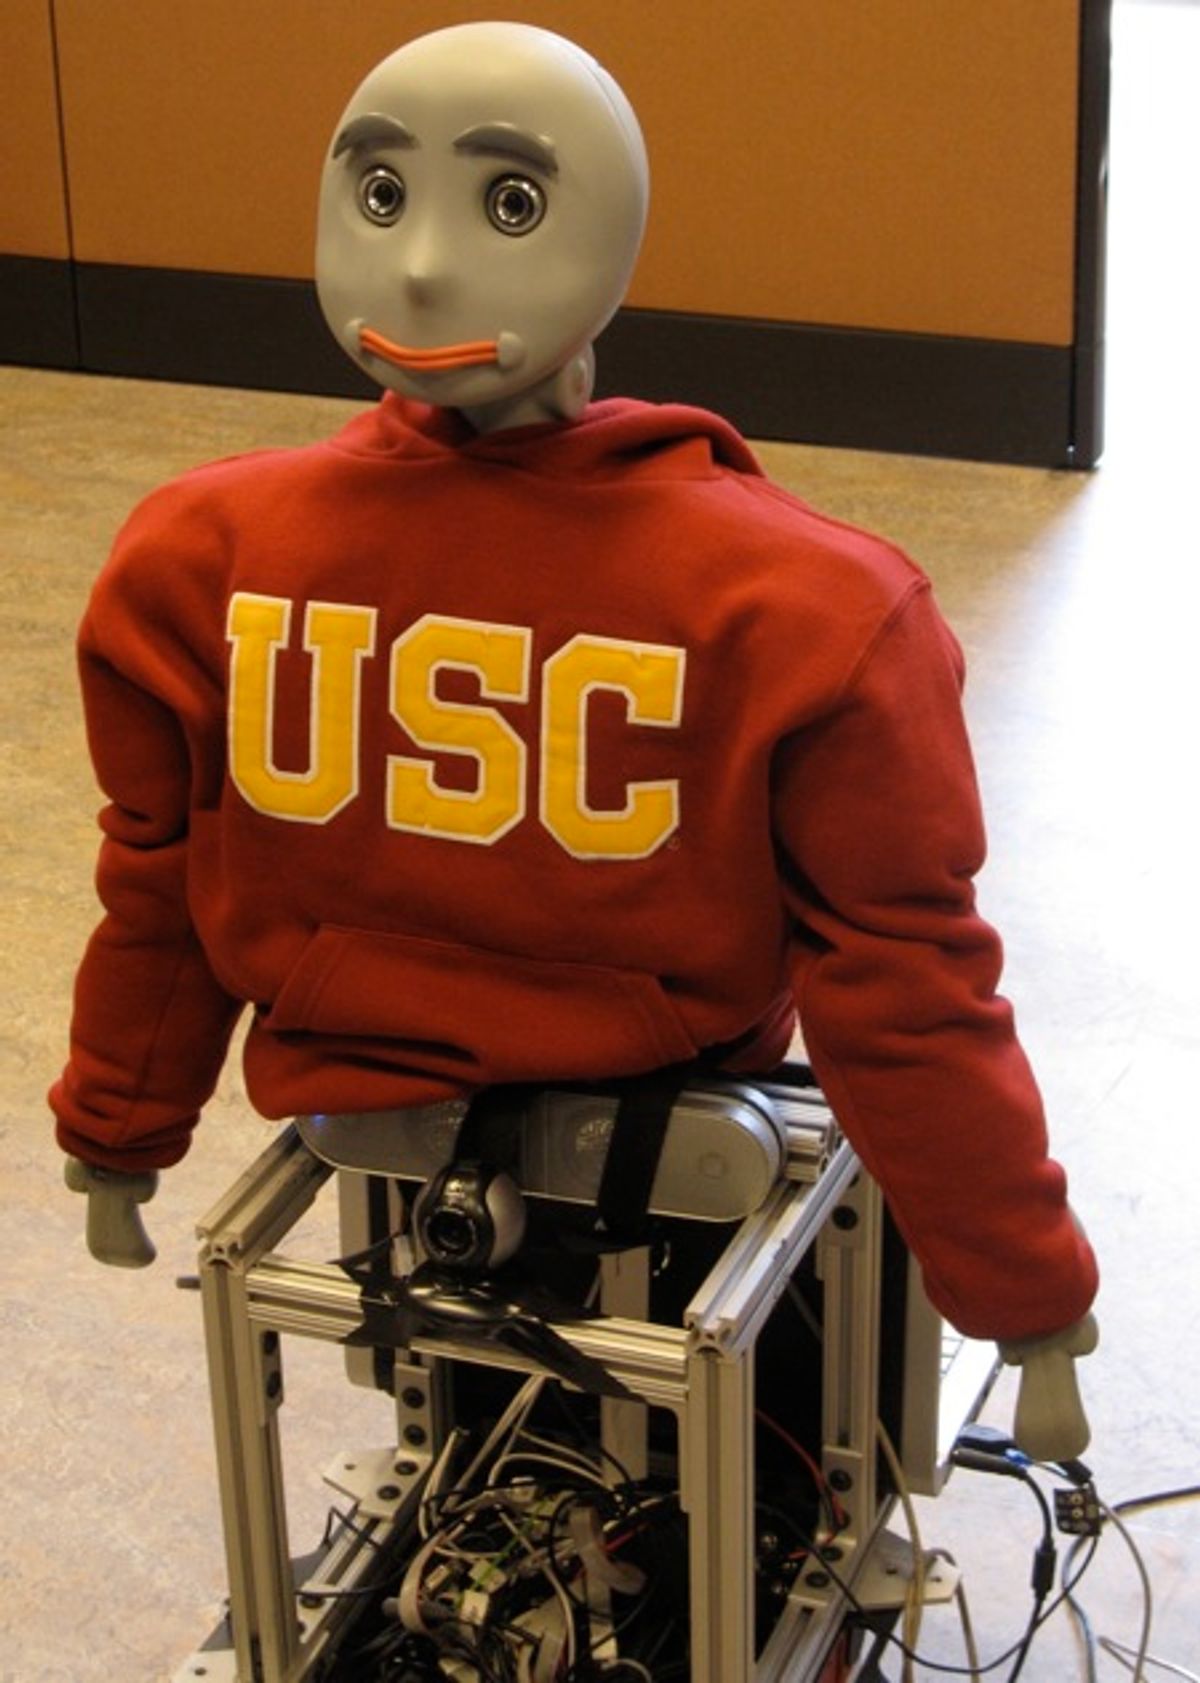 Bandit, Little Dog, and More: University of Southern California Shows Off Its Robots